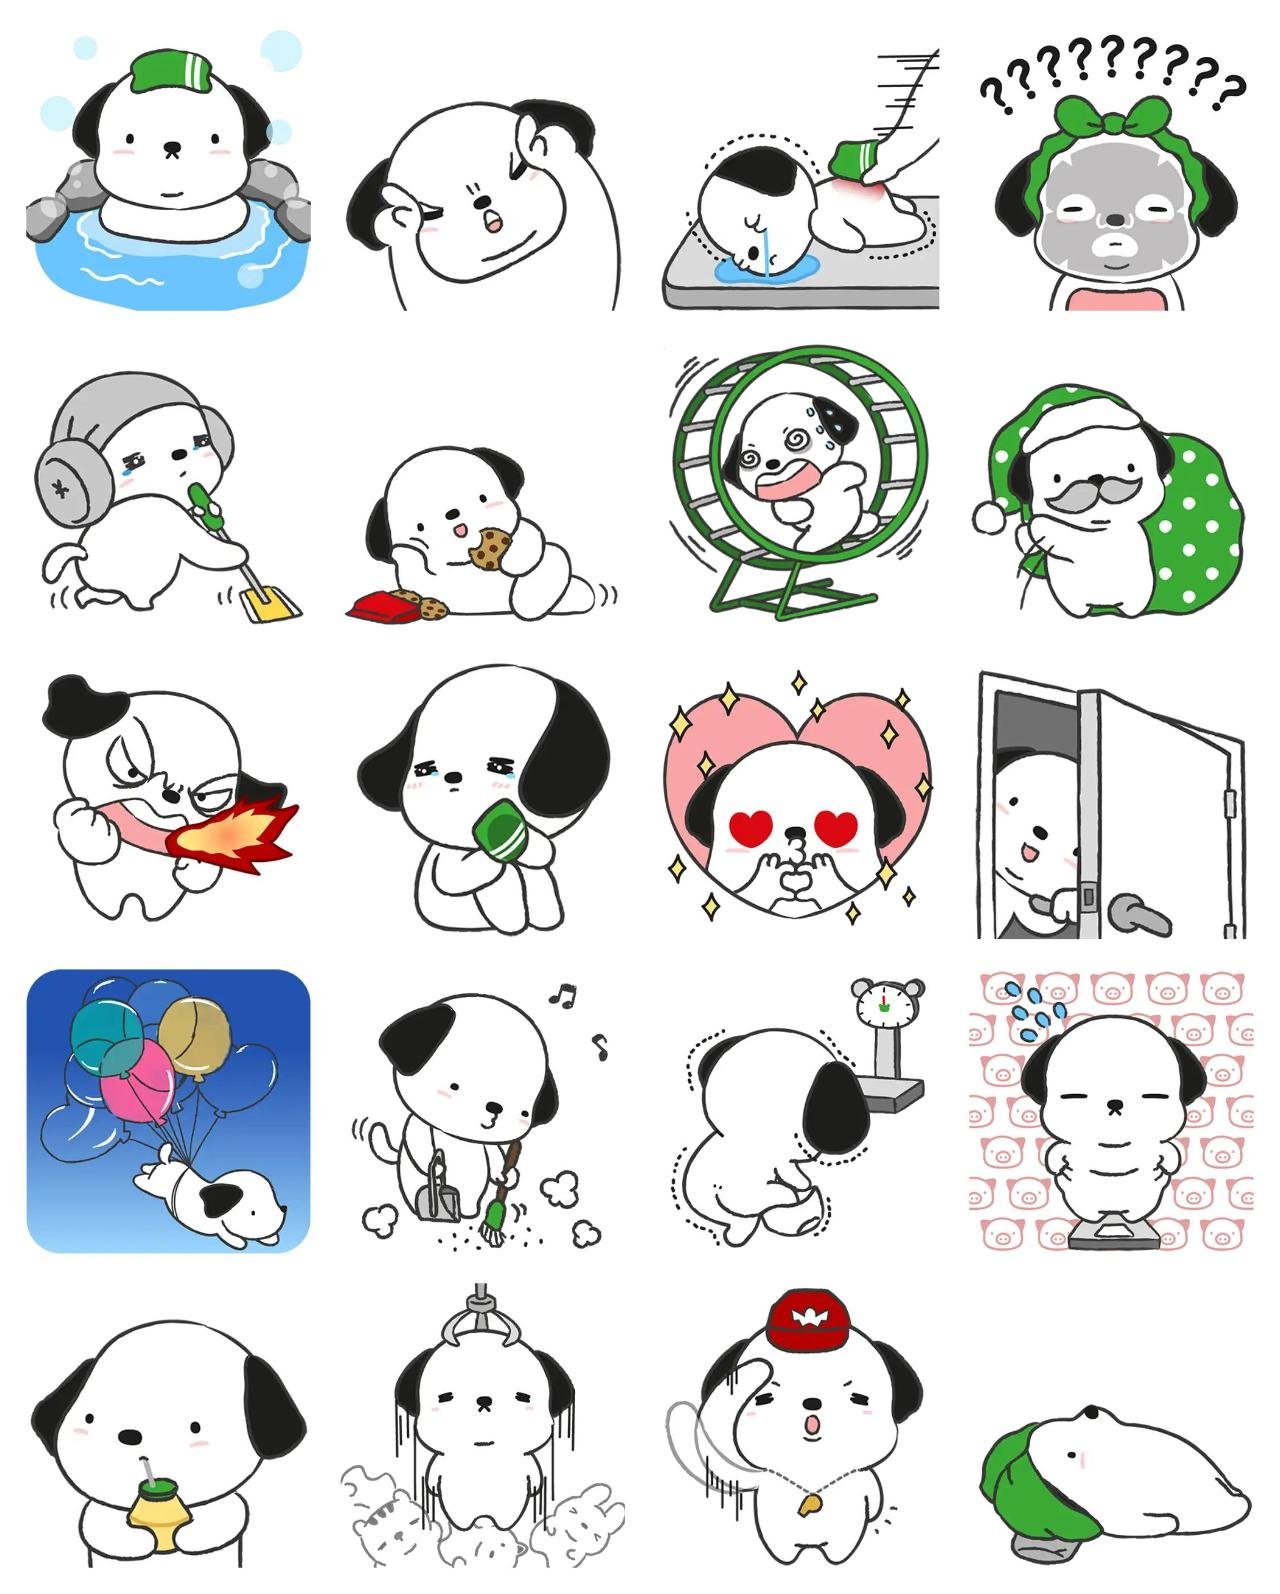 Working doggy in spa Animation/Cartoon,Animals sticker pack for Whatsapp, Telegram, Signal, and others chatting and message apps